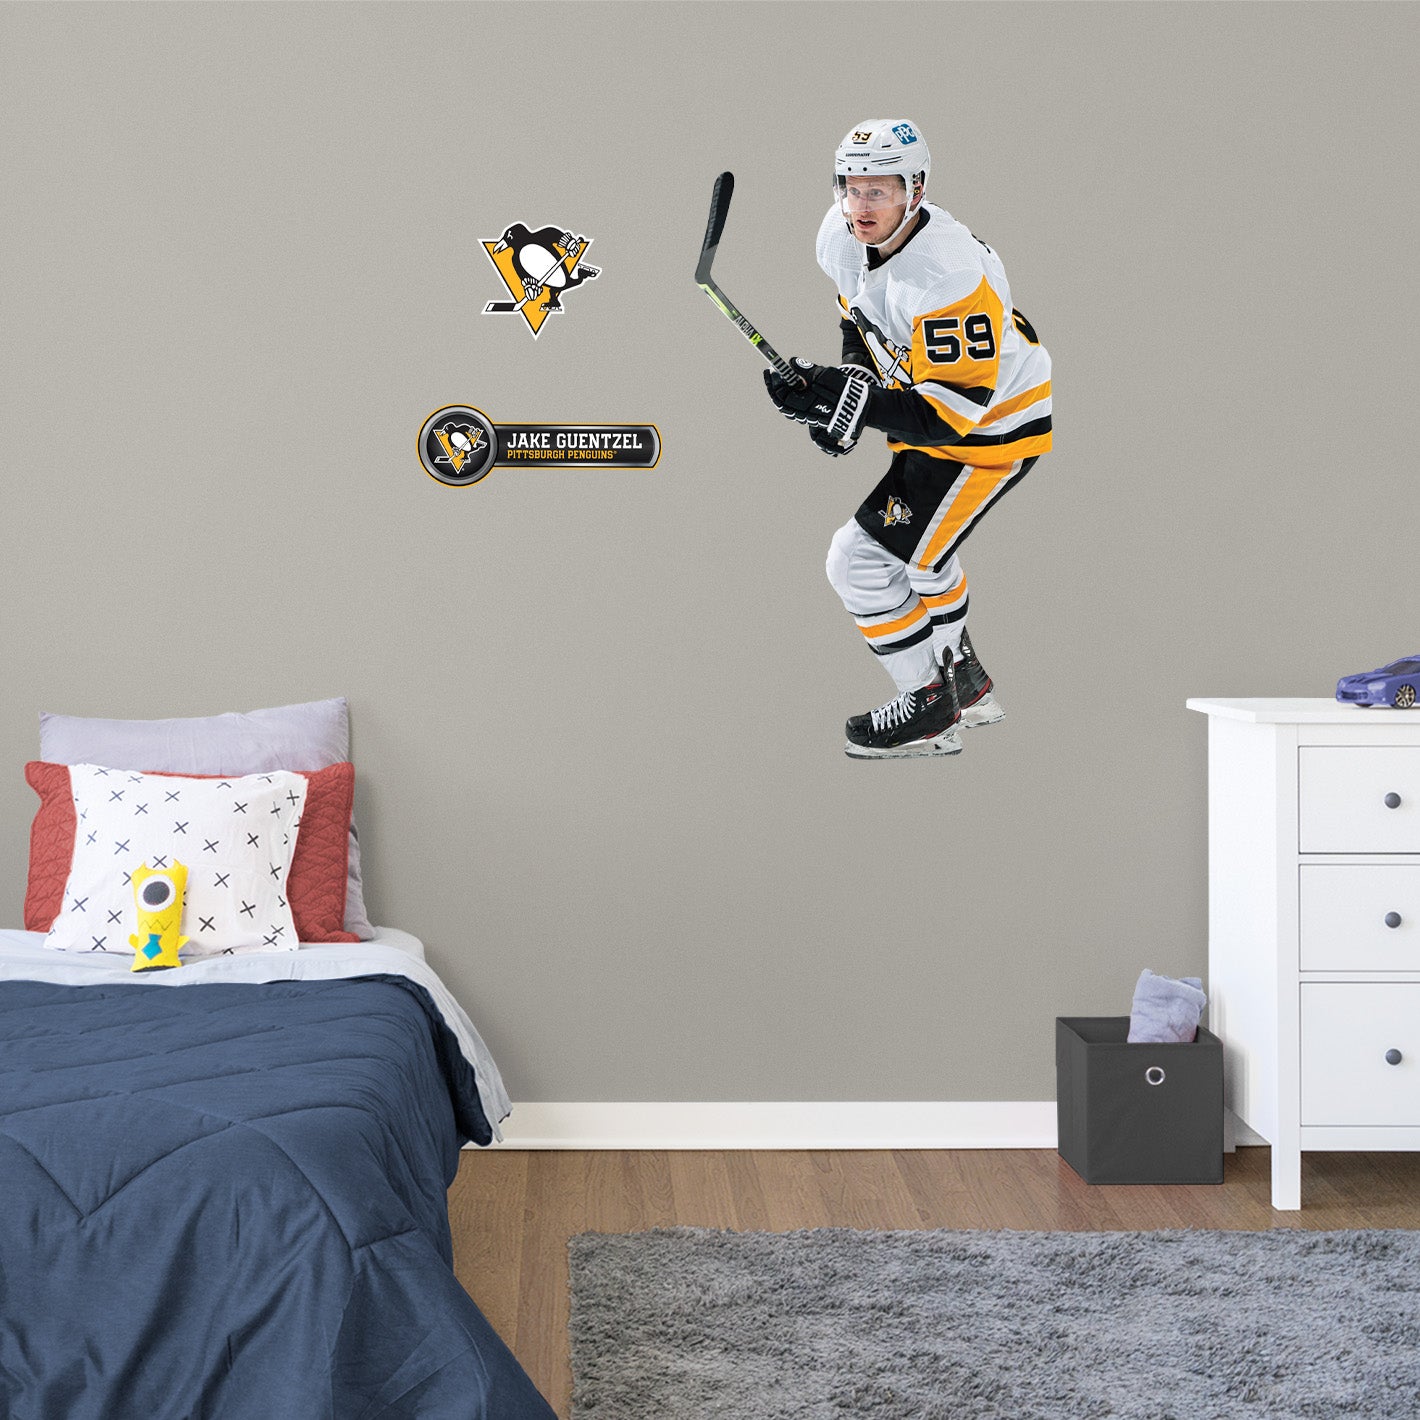 Pittsburgh Penguins: Jake Guentzel - Officially Licensed NHL Removable Adhesive Decal